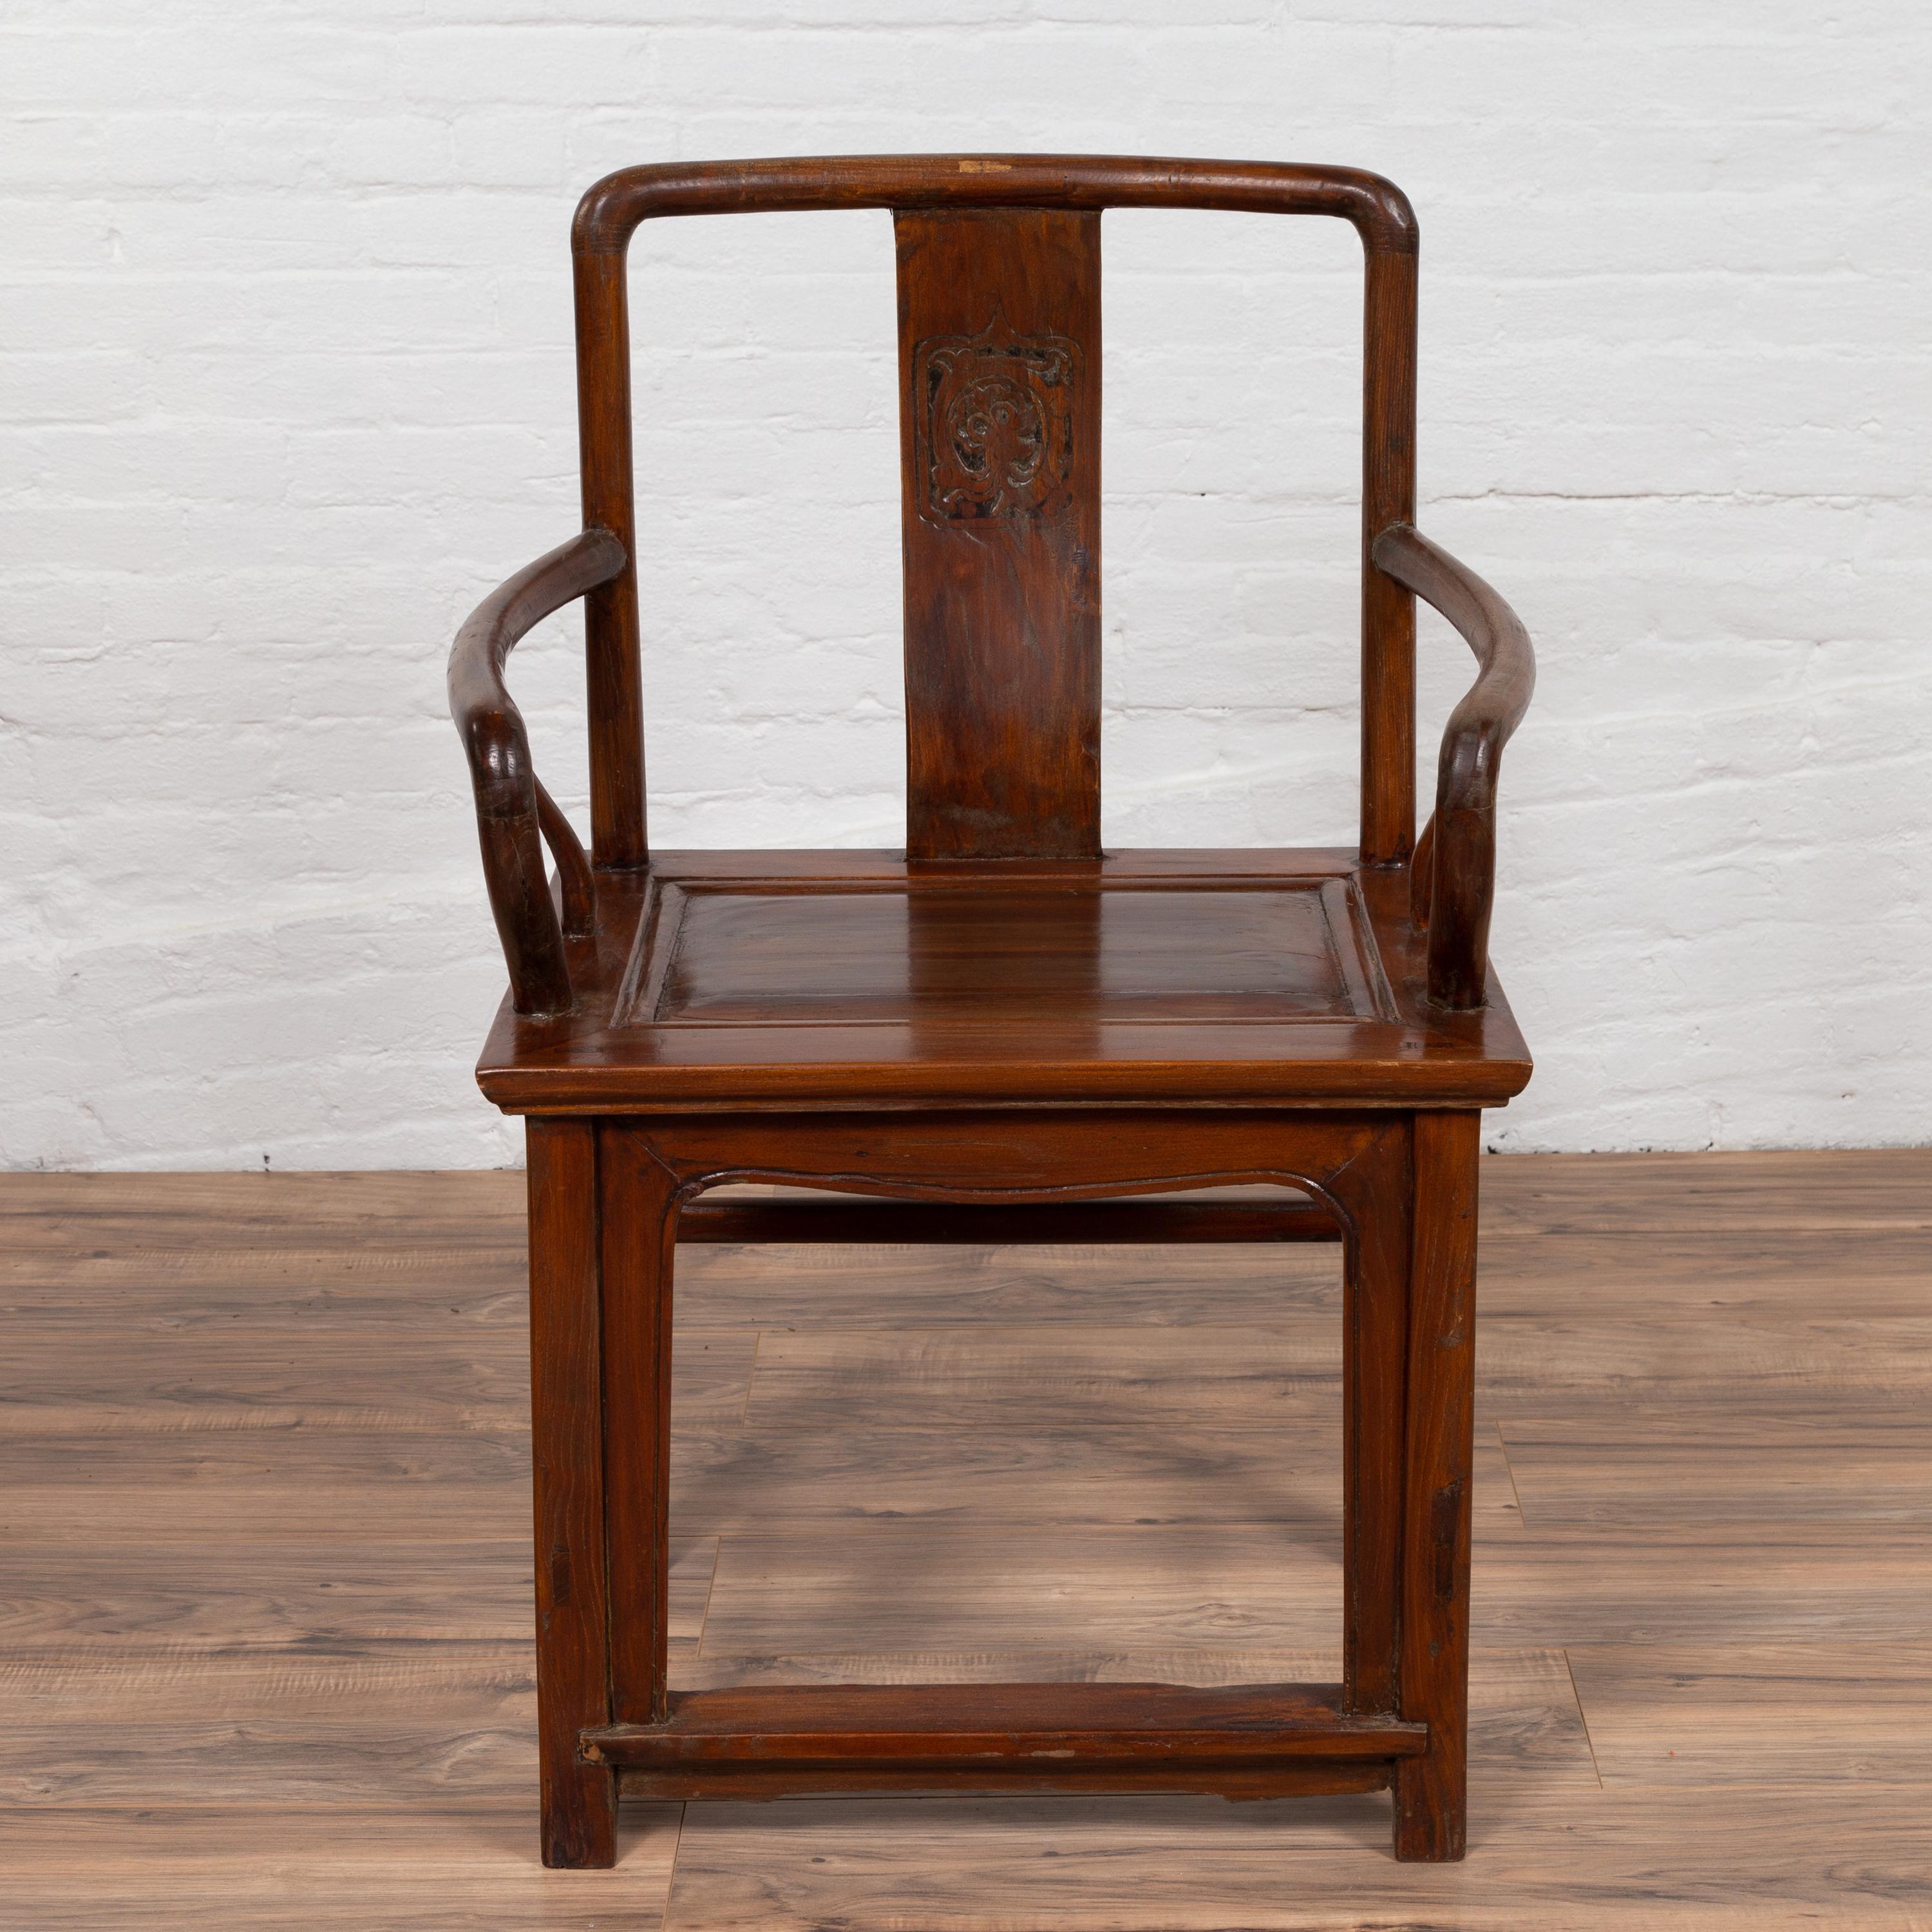 An antique Chinese Ming Dynasty style wooden wedding chair from the early 20th century, with carved medallion, curving armrests and natural wood patina. Born in China during the early years of the 20th century, this exquisite armchair features an